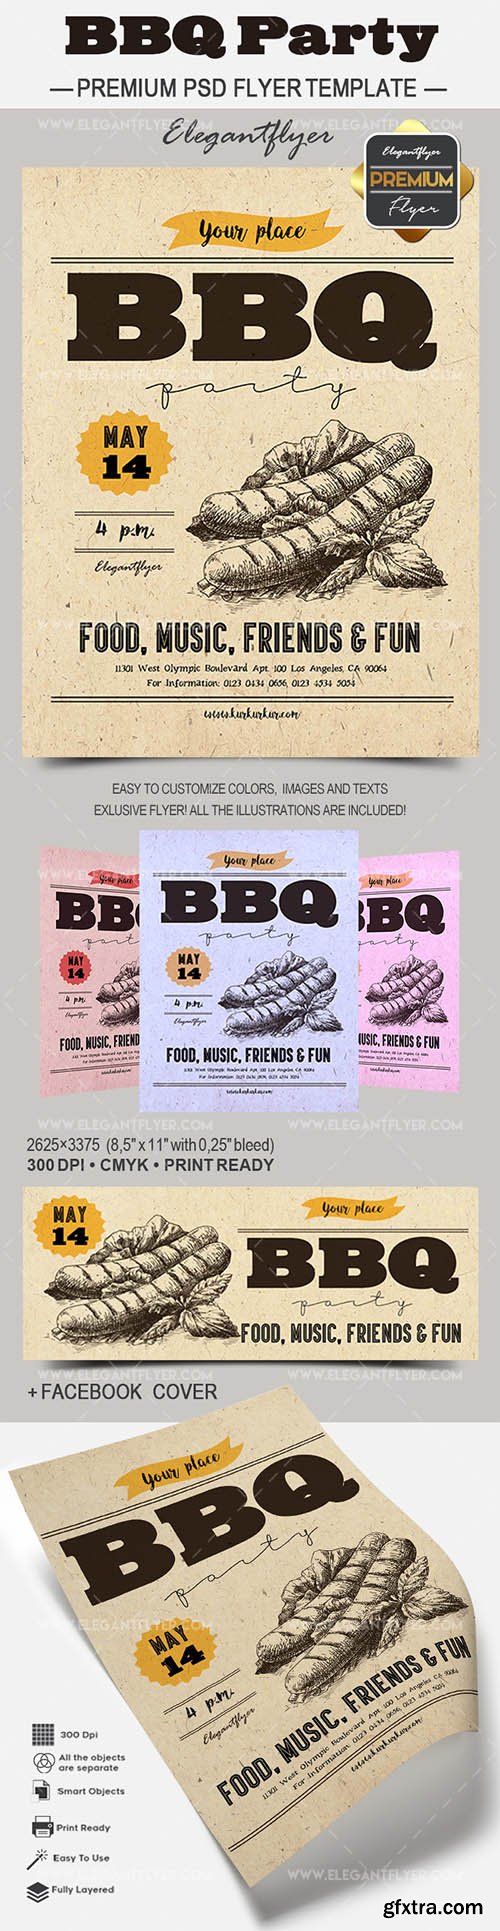 BBQ Party – Premium Flyer PSD Template + Facebook Cover